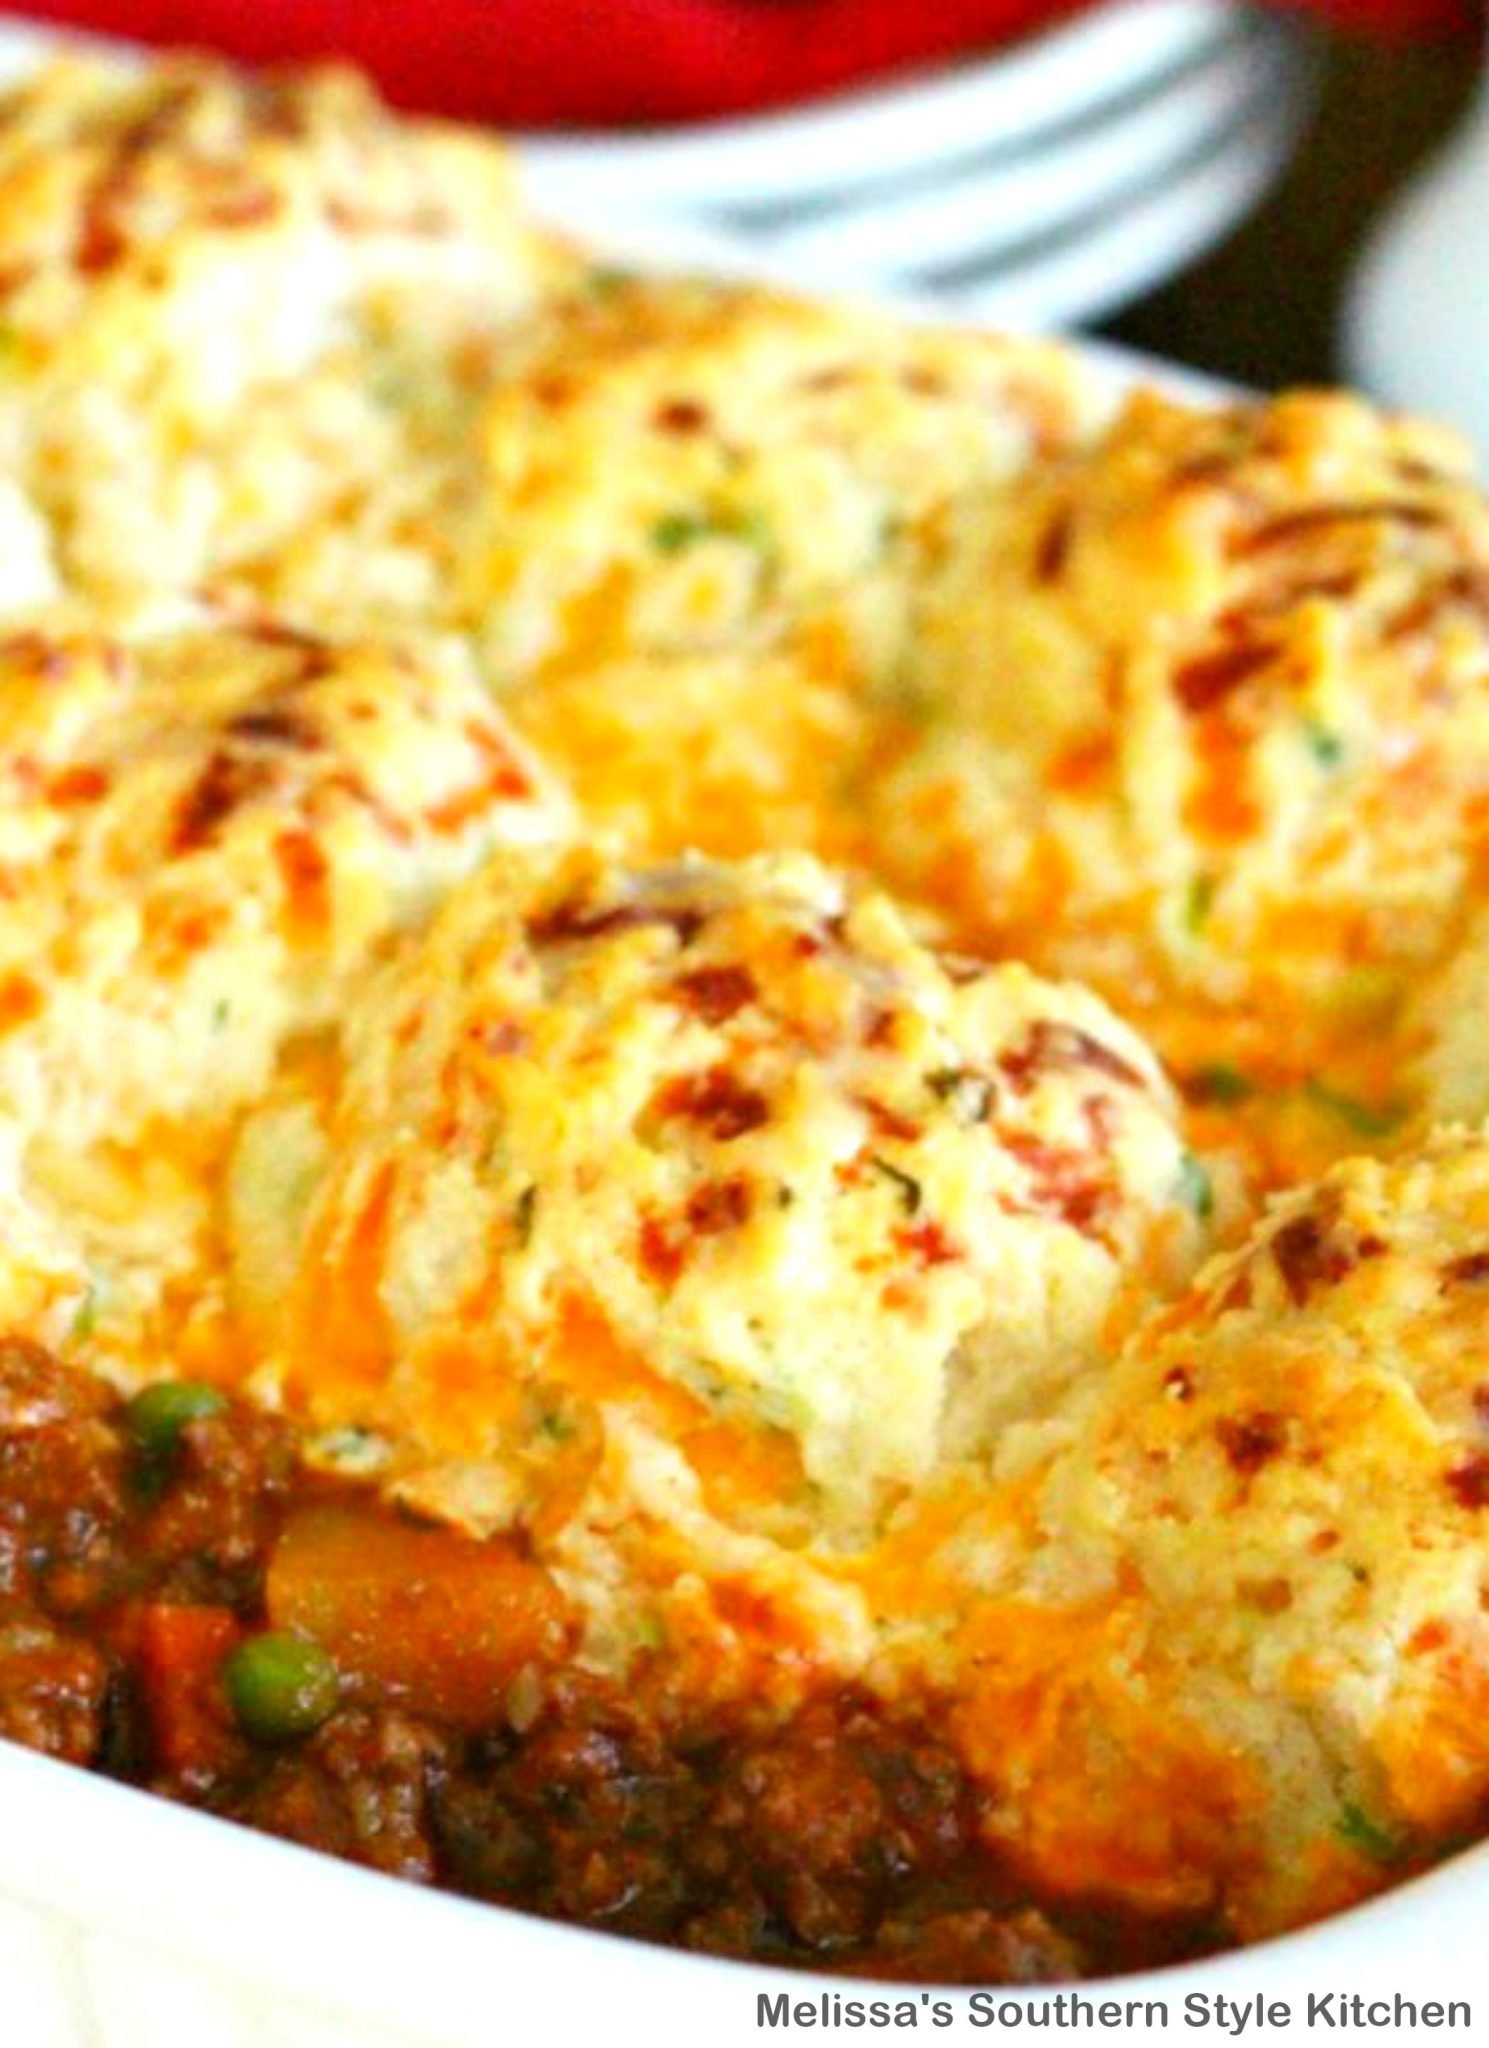 Beef Pot Pie With Cheddar Onion Biscuits